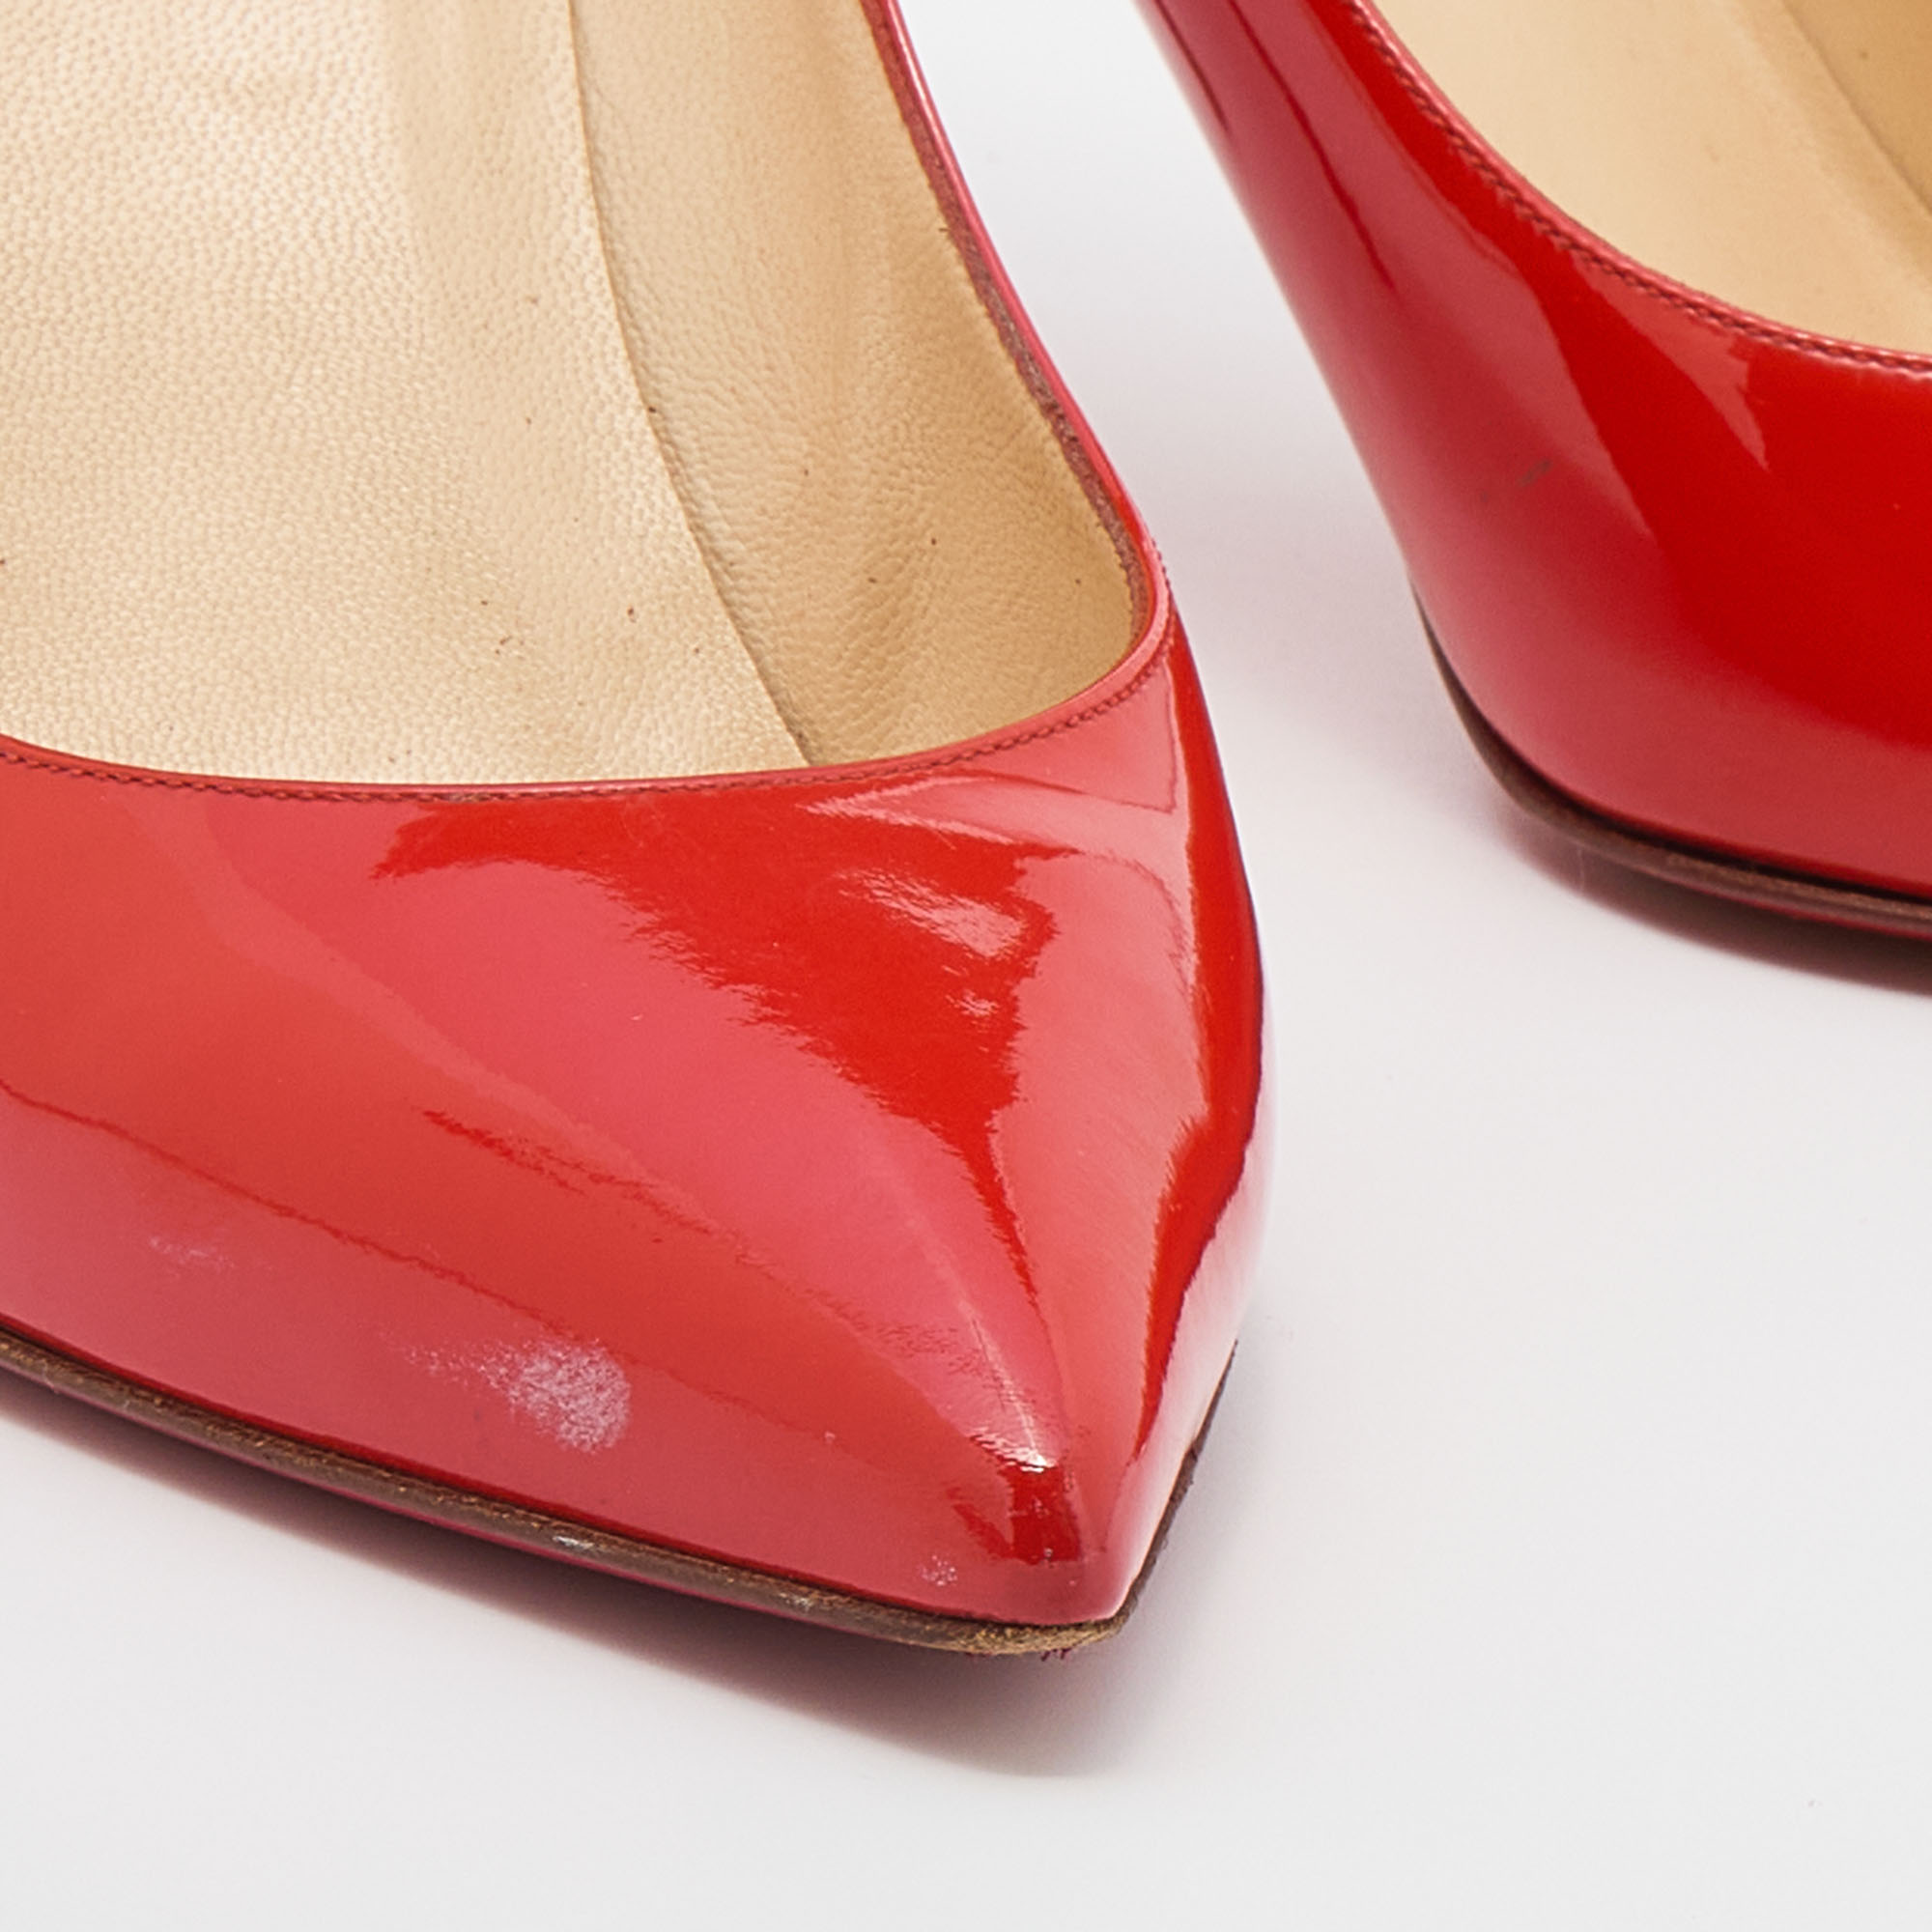 Christian Louboutin Orange Patent Leather Pointed Toe Pumps Size 39.5